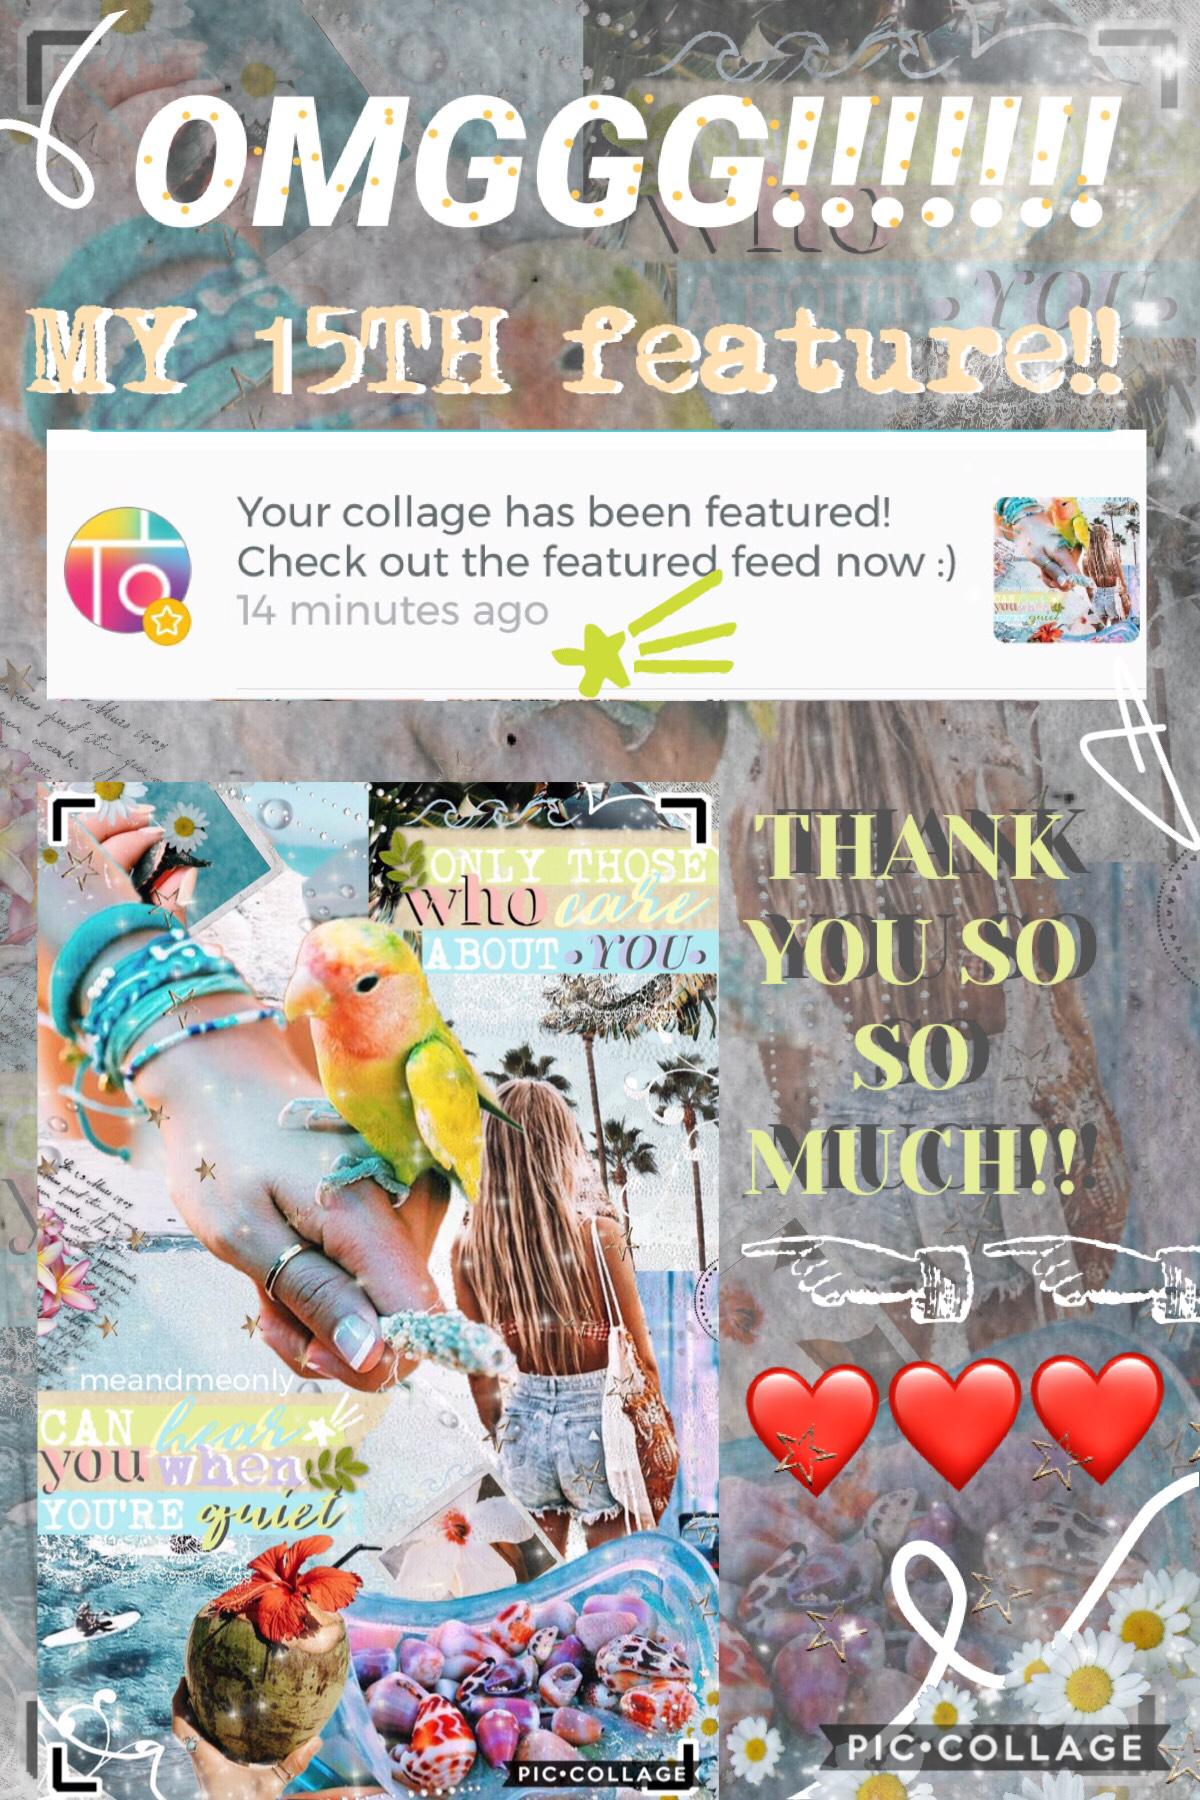 omg thank you so much @piccollage for my 15th feature! and sorry for my super bad layout, haha had to rush it because I gotta go to sleeeppp🥰 thanks again!! love you all xoxo💞💞